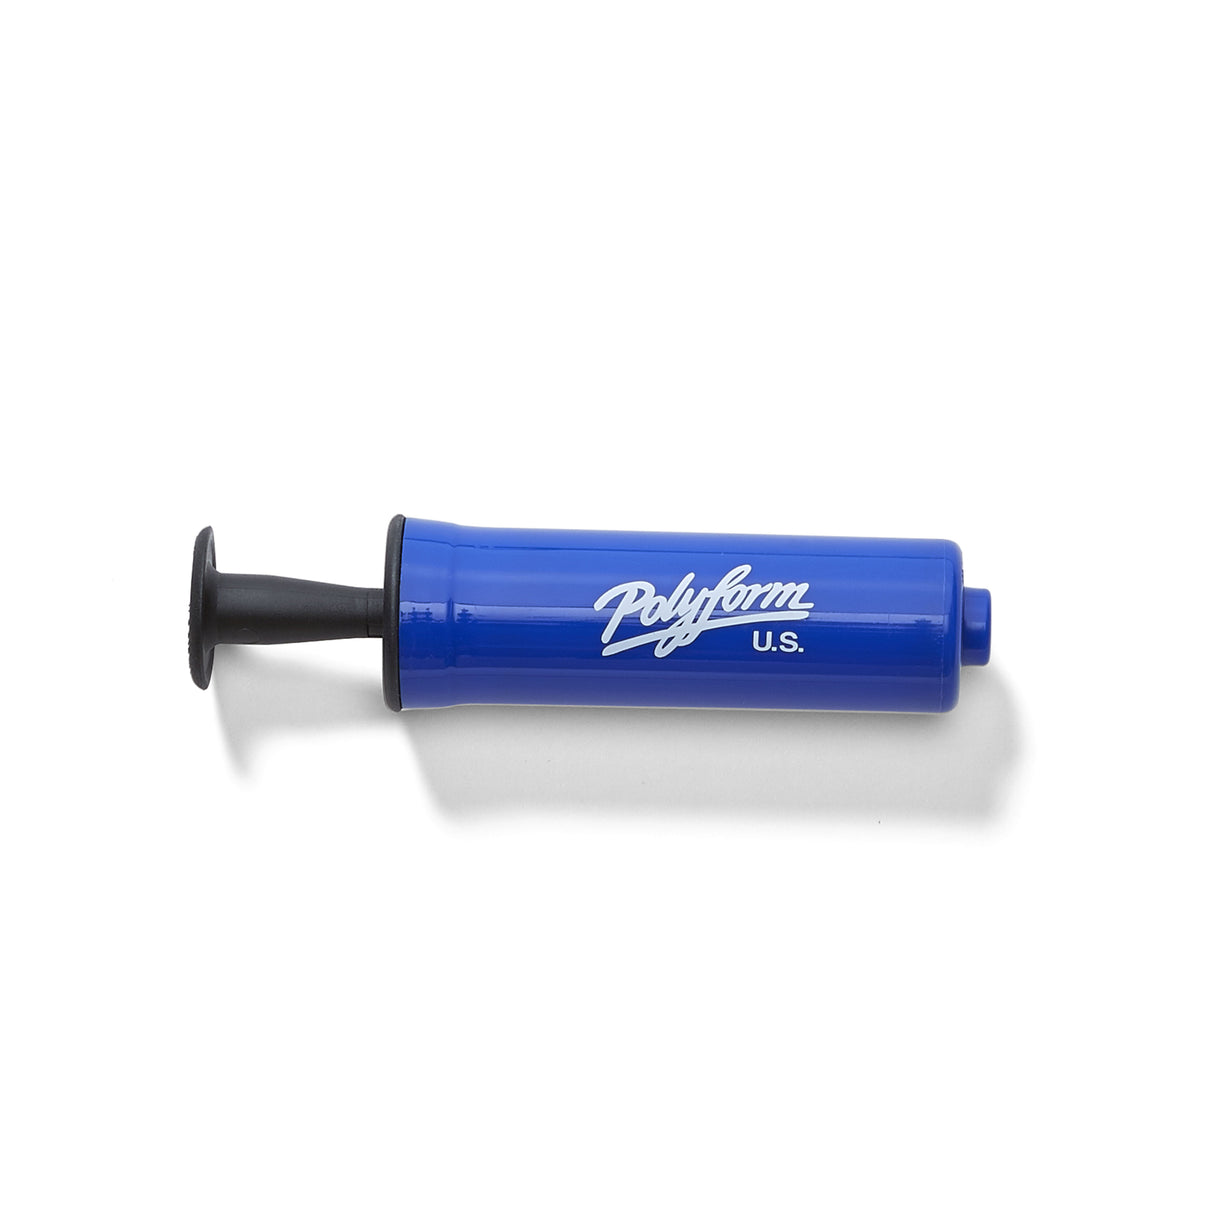 Polyform US mini hand pump for inflating boat fenders and buoys